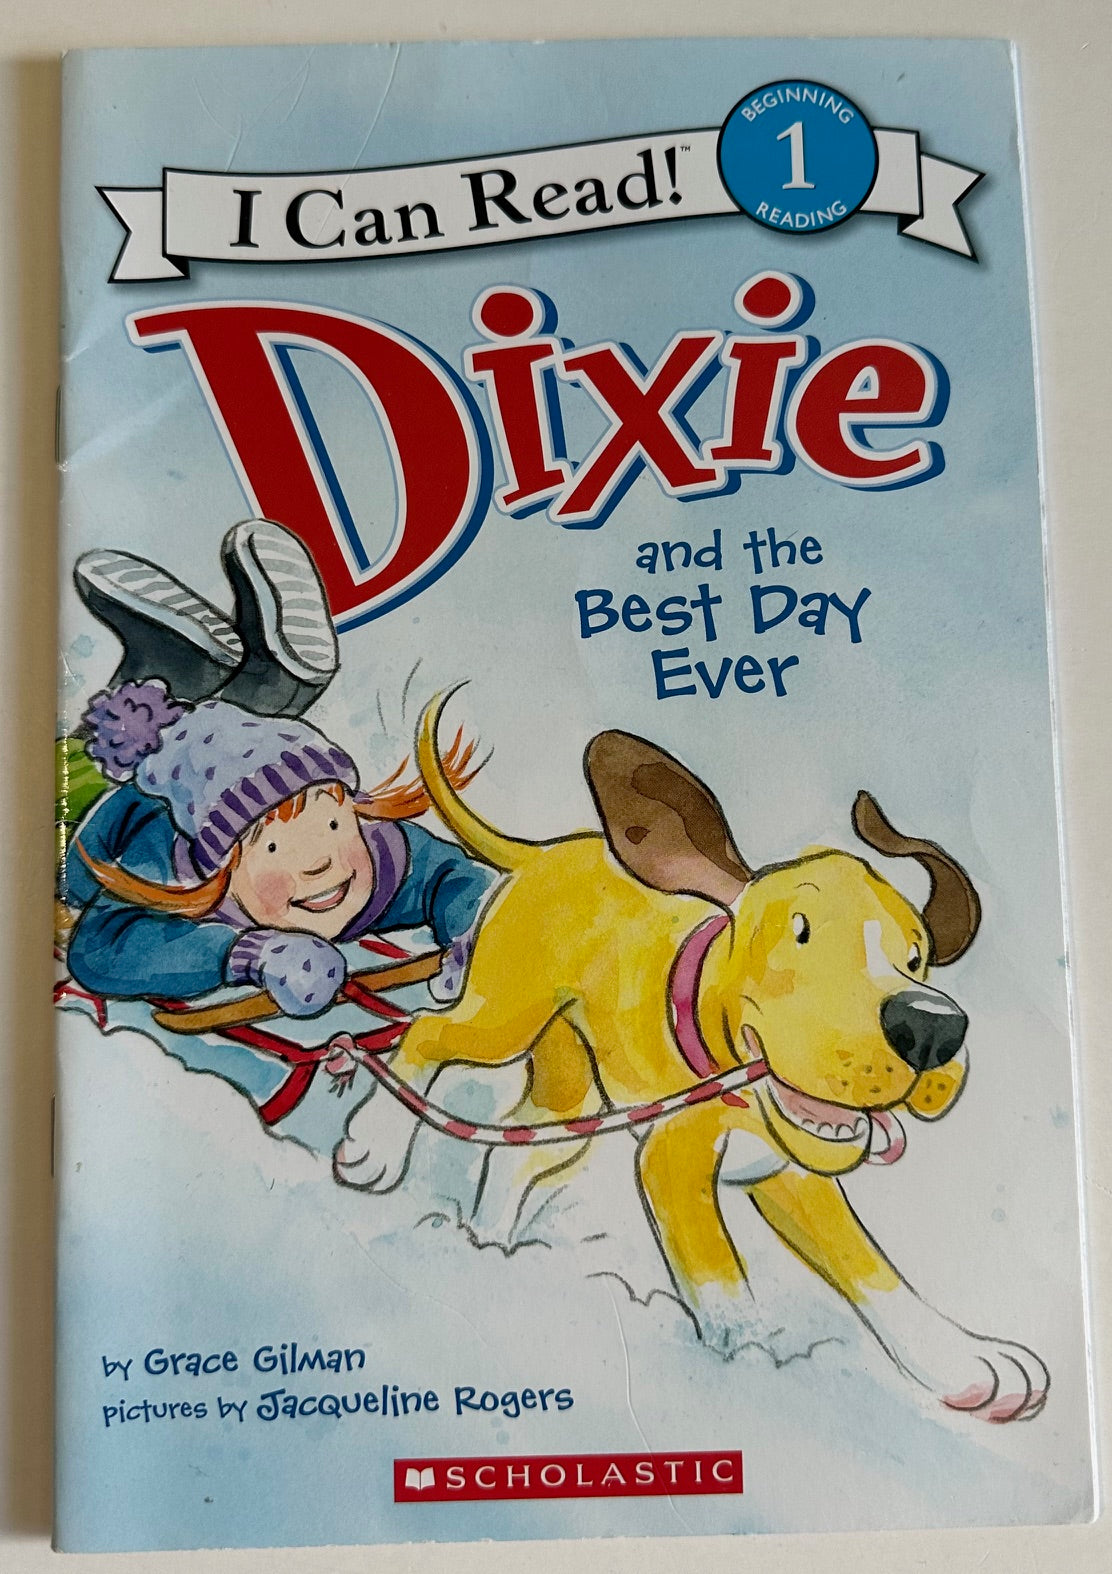 "Dixie and the Best Day Ever"